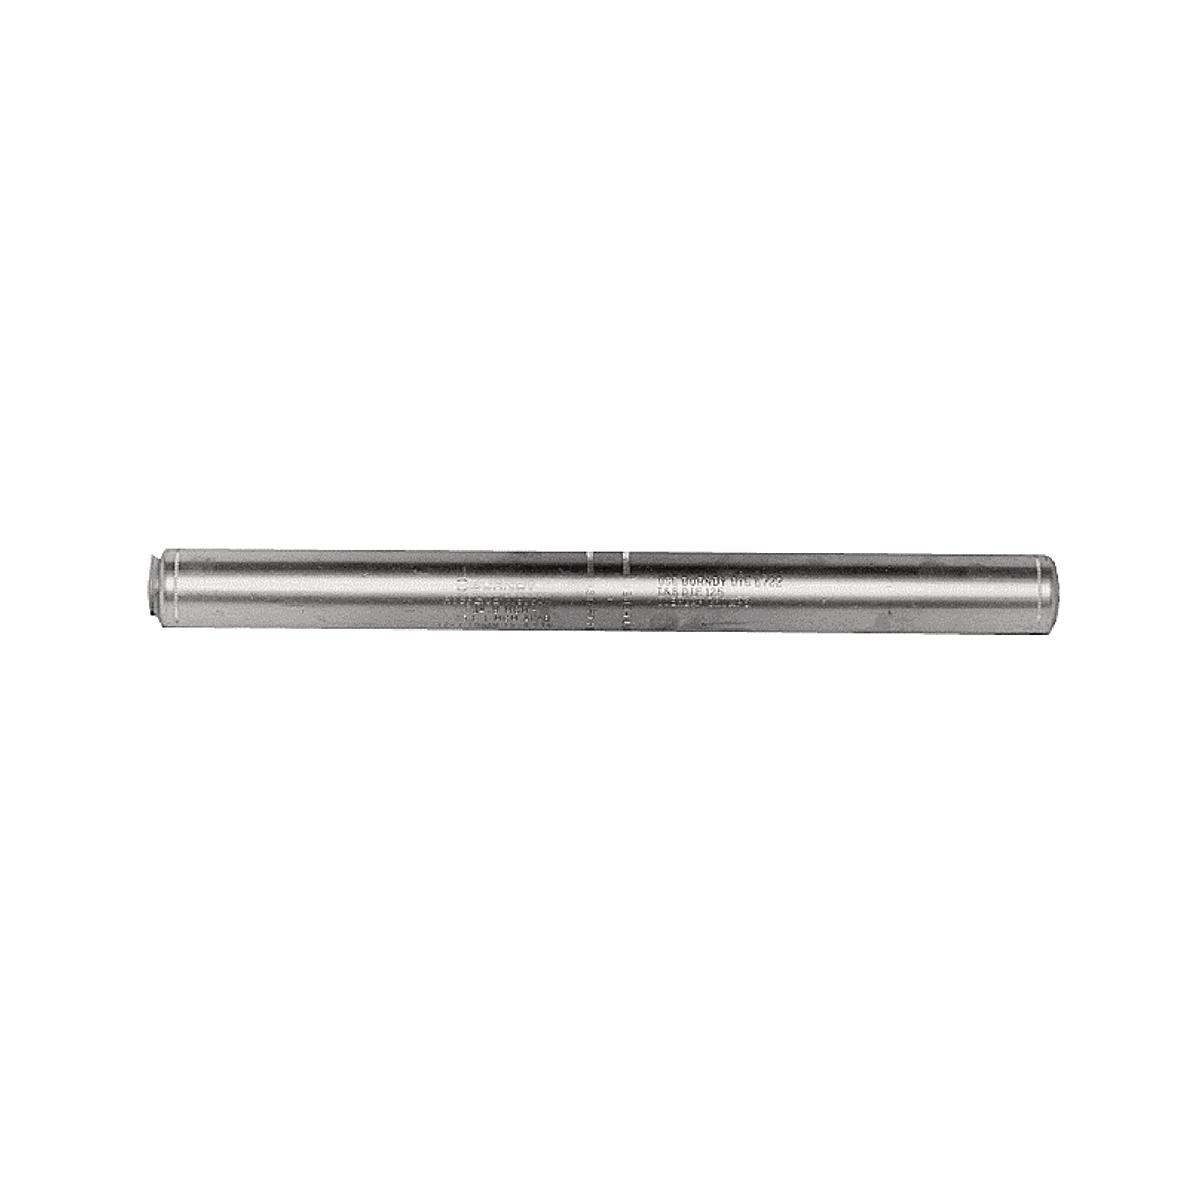 Hubbell YTS43RS Steel Sleeve, 605, 363, 666.6 kcmil ACSR, 230 V, 5.90" L, 723 Index, Included in Full Tension Splice. 